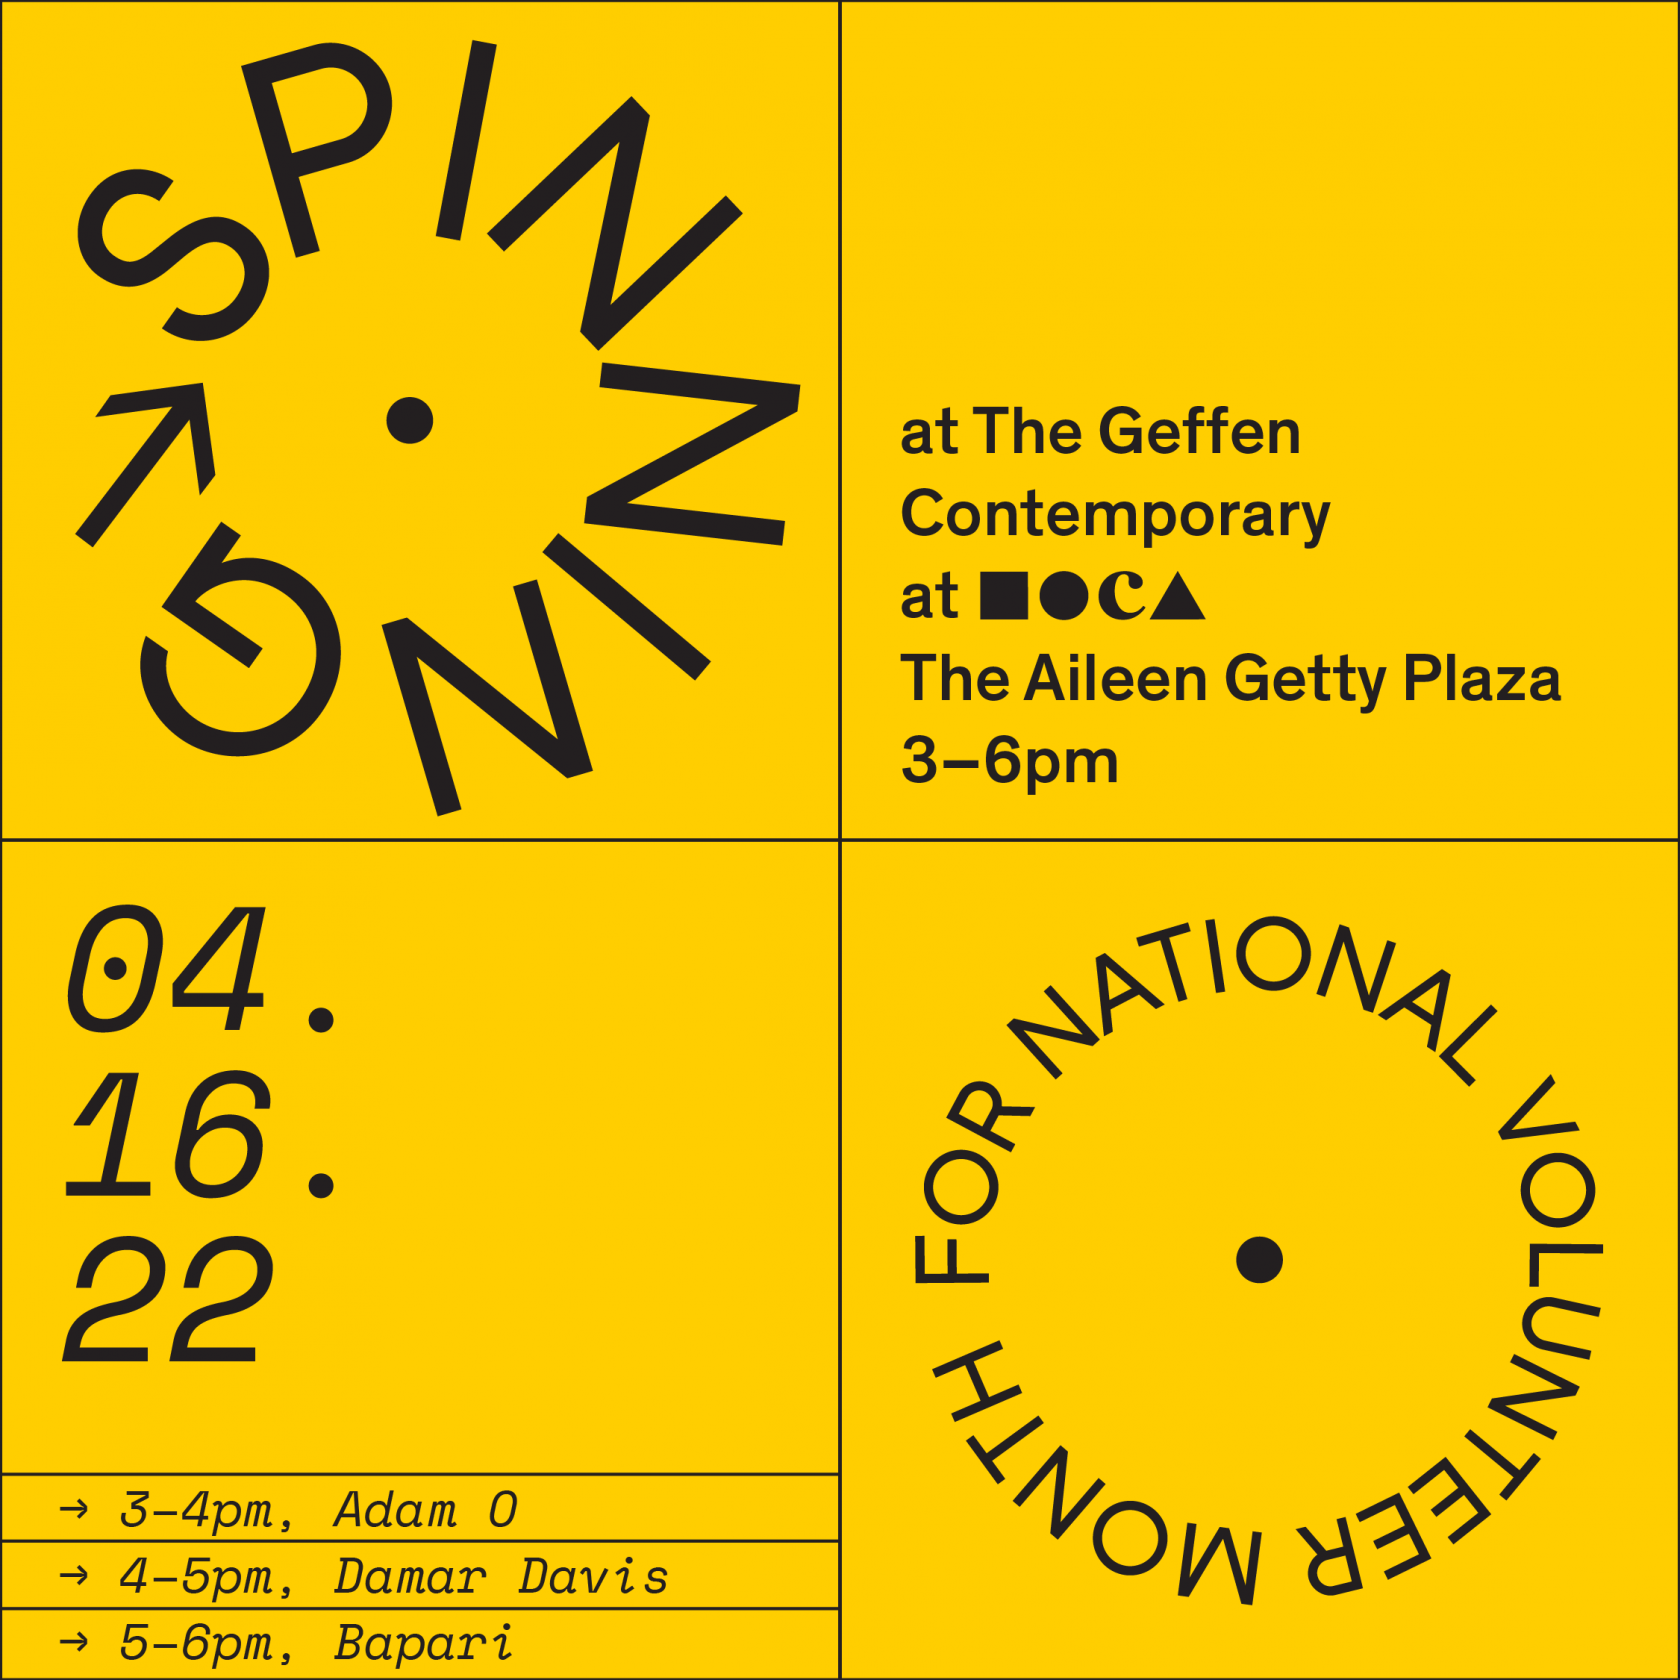 SPINNING at The Geffen Contemporary at MOCA